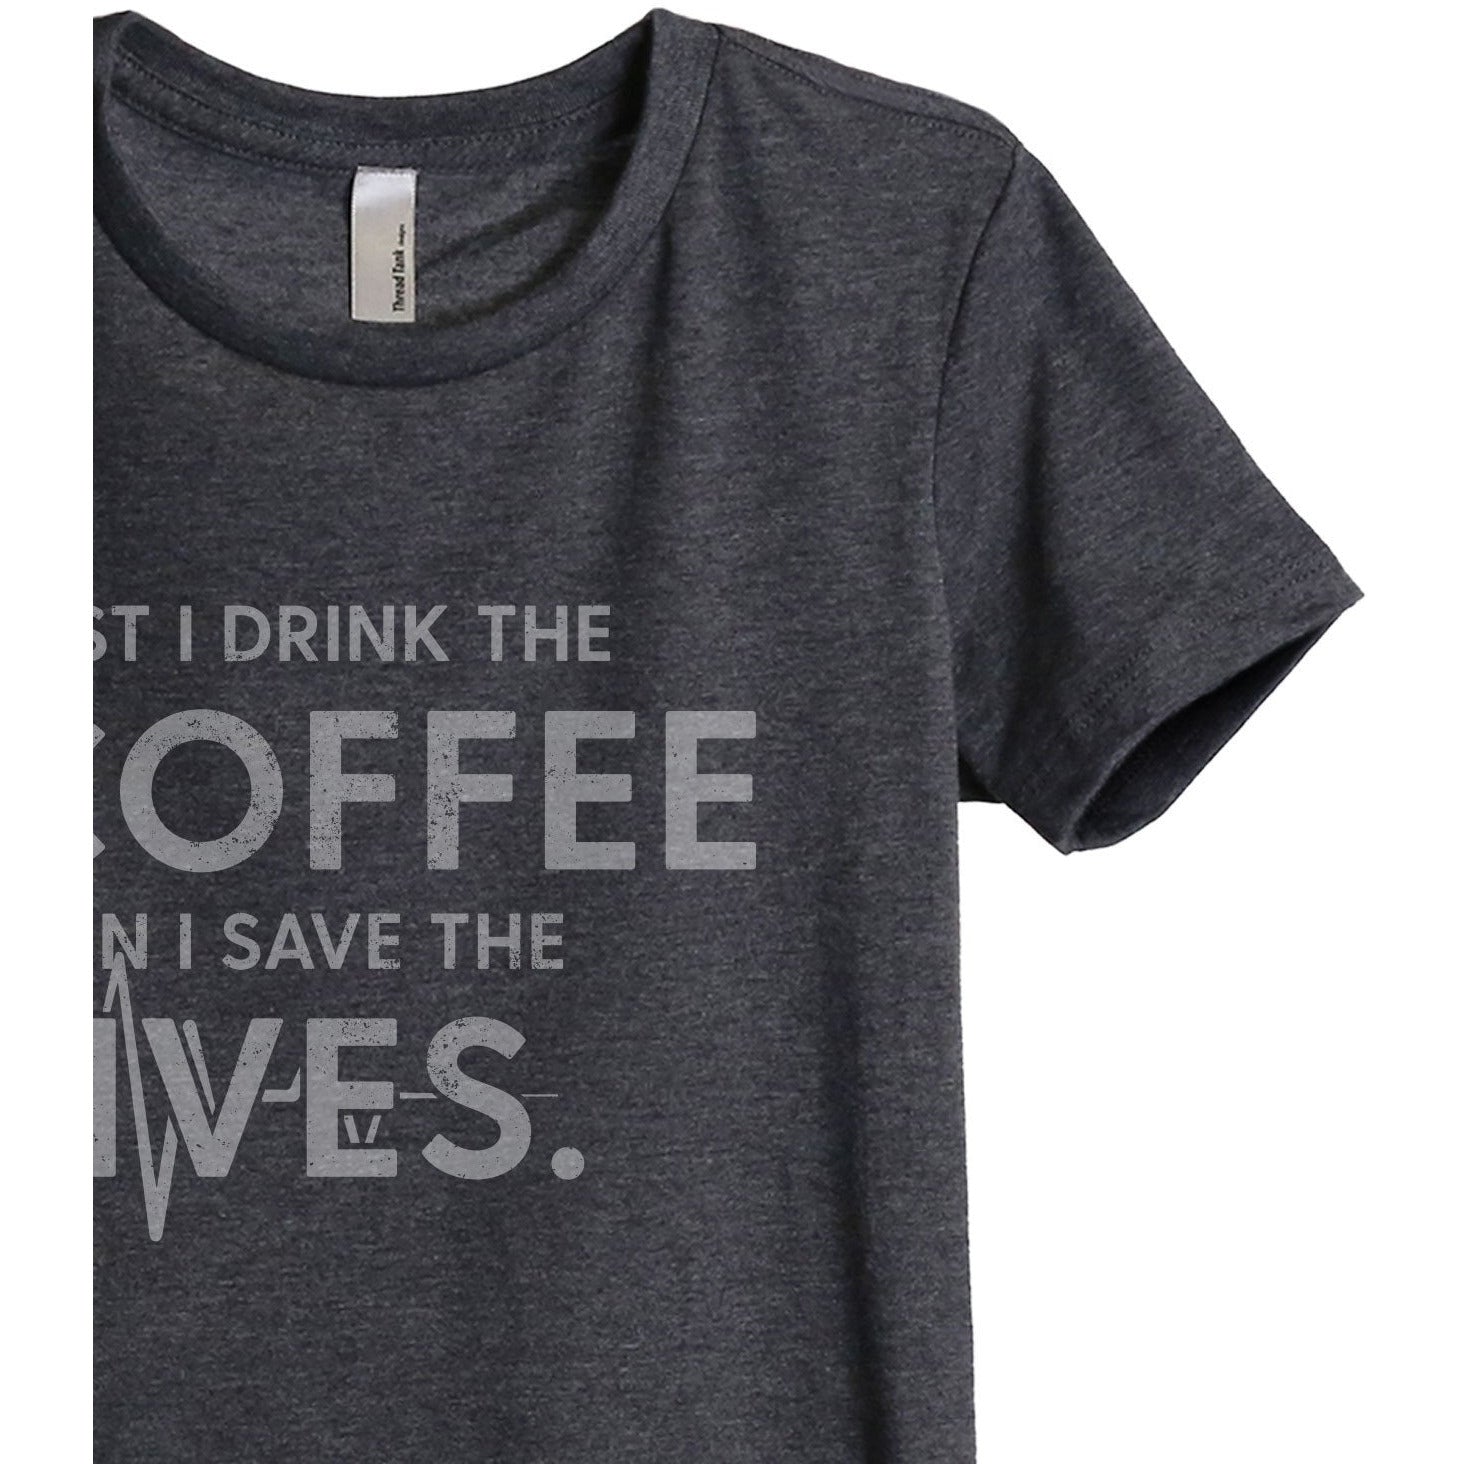 First I Drink The Coffee Then I Save The Lives Women's Relaxed Crewneck T-Shirt Top Tee Charcoal Grey Zoom Details